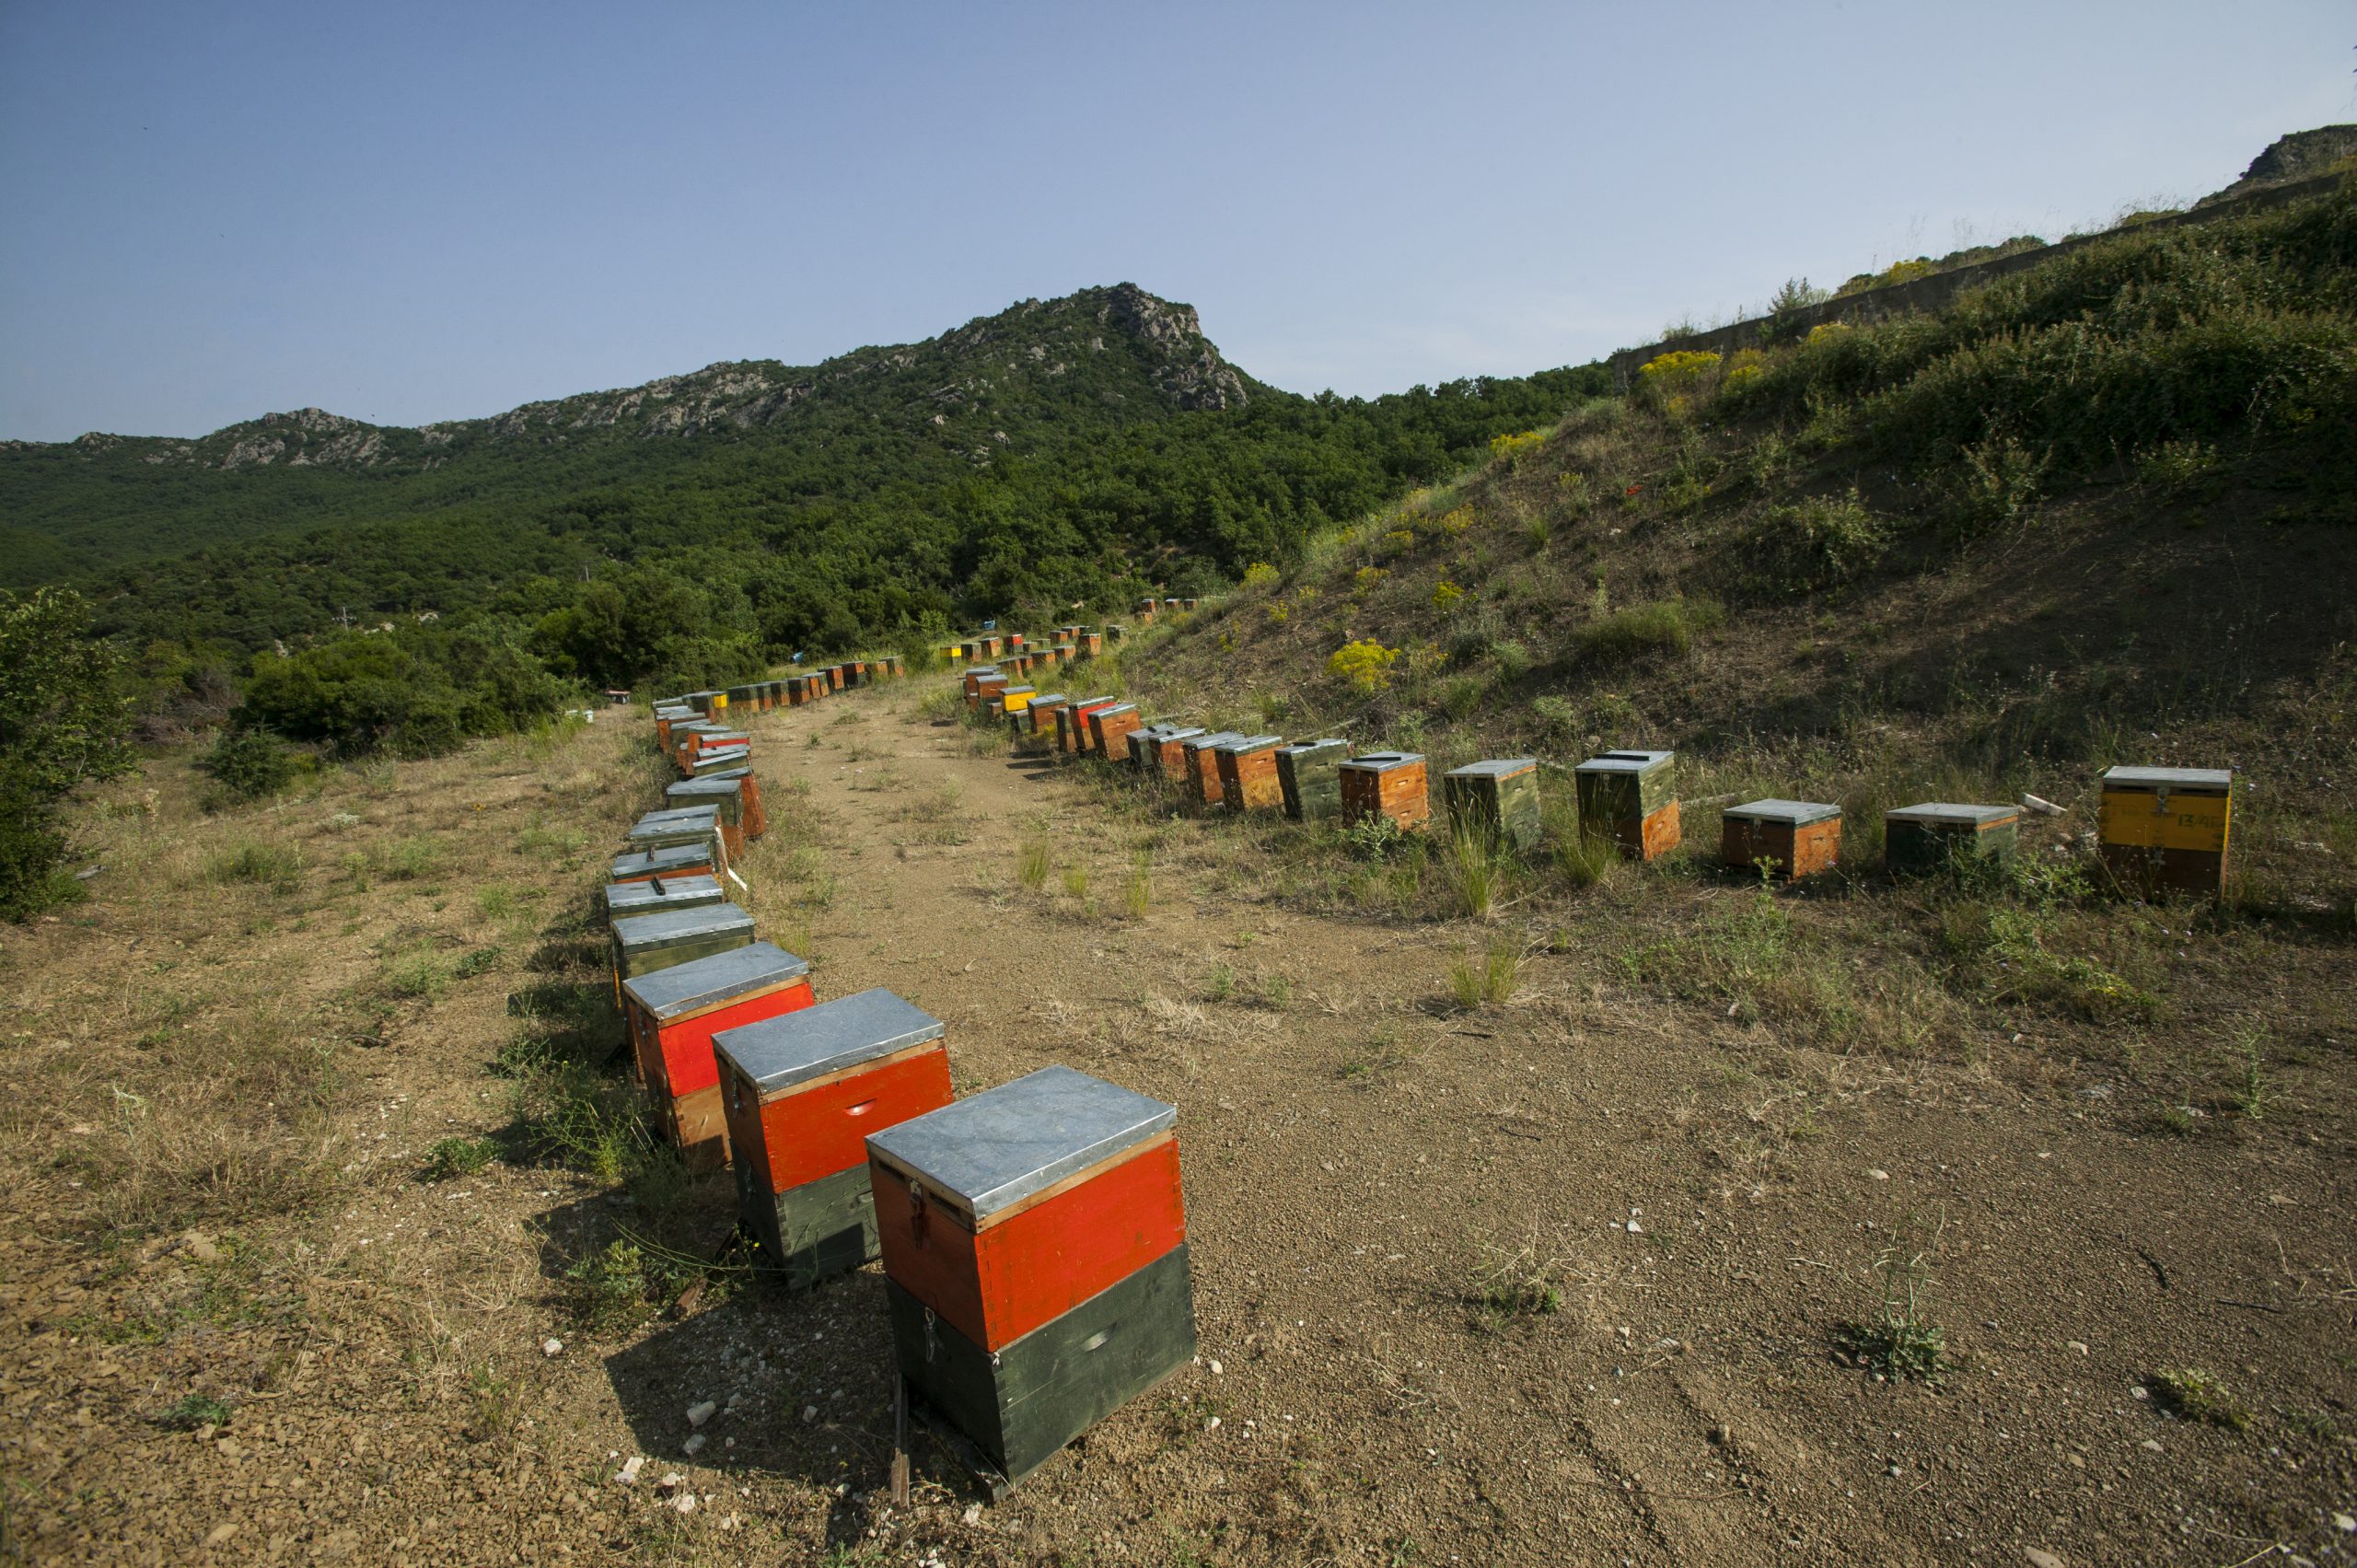 Isolated South African Bees Reproducing Asexually